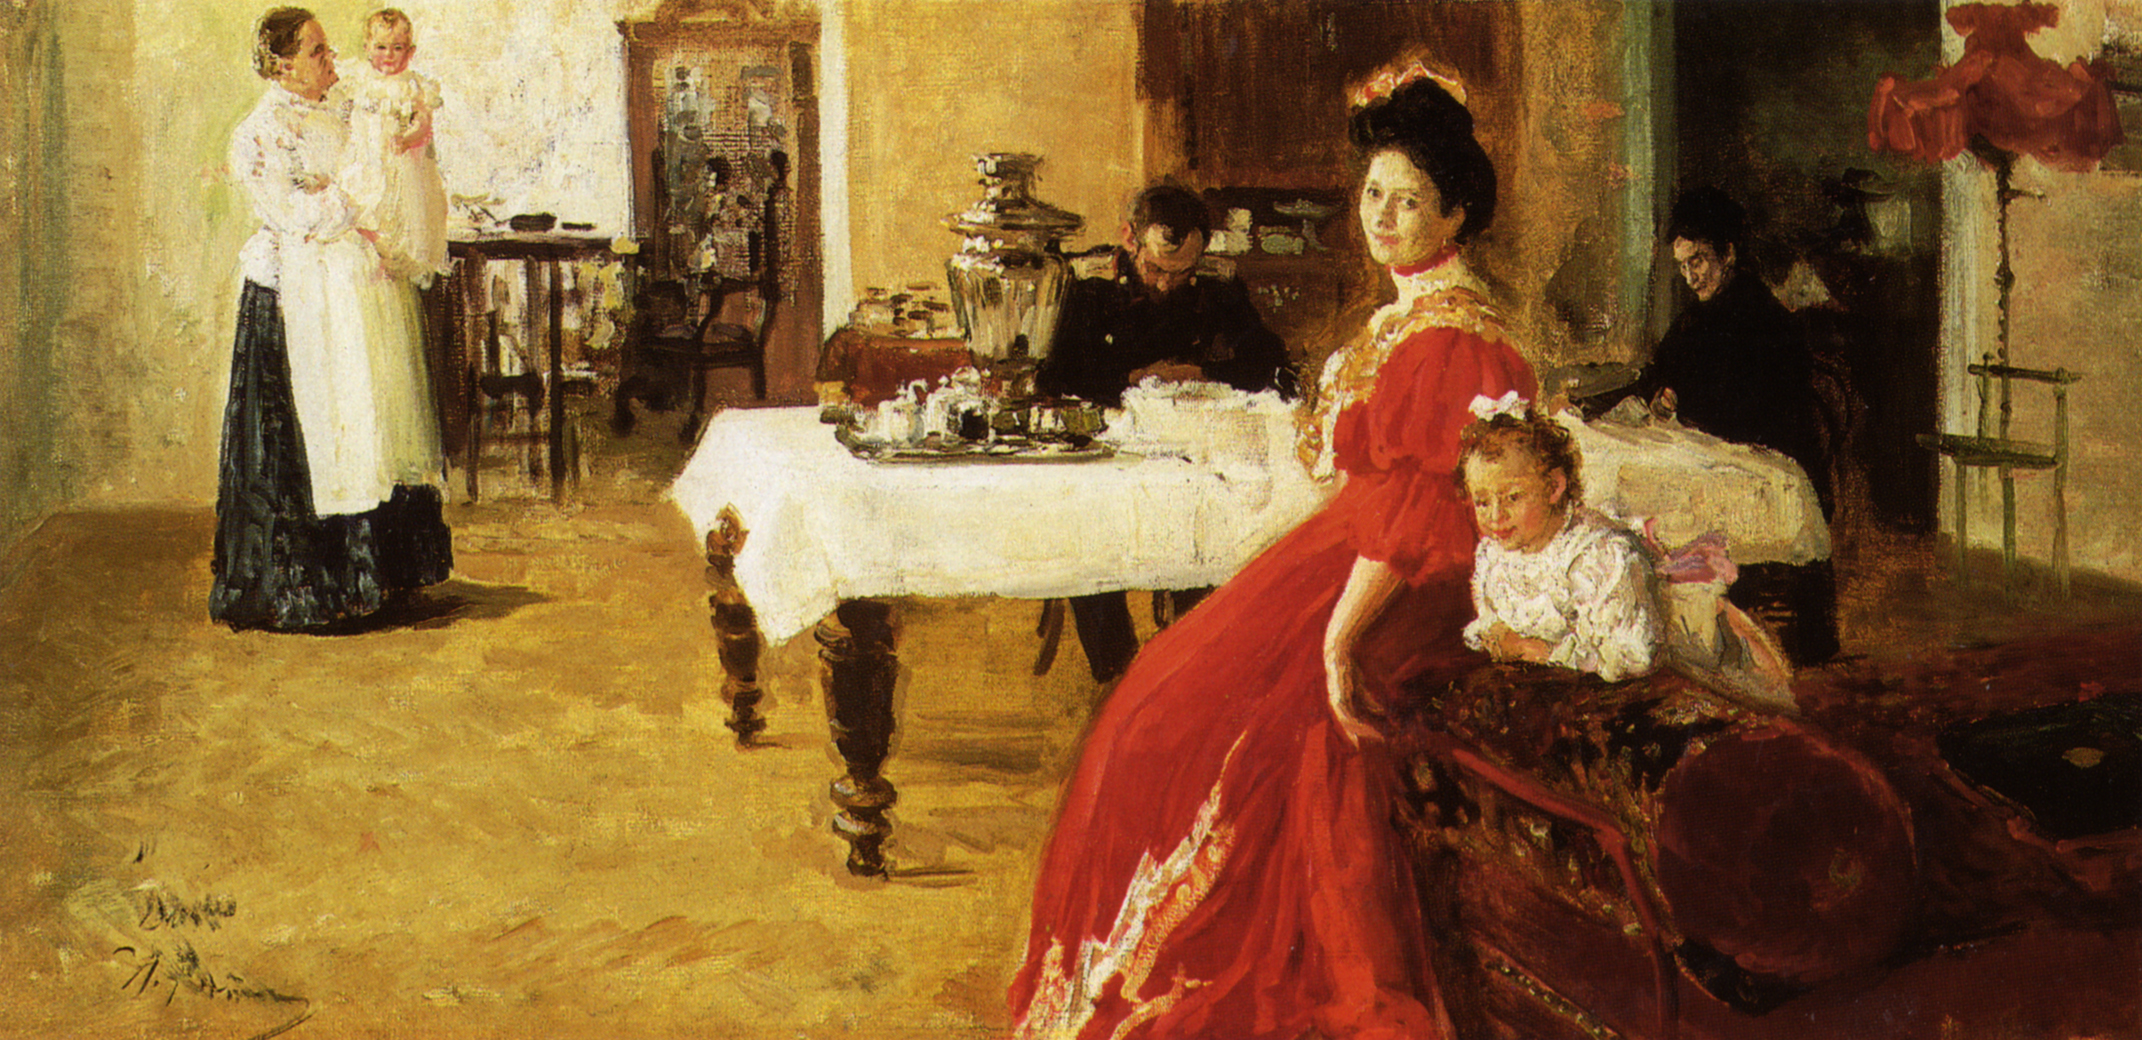 0188_Ilya Yefimovich Repin_Family Portrait The Artist's Daughter, Tatyana, and her familiy 썸네일